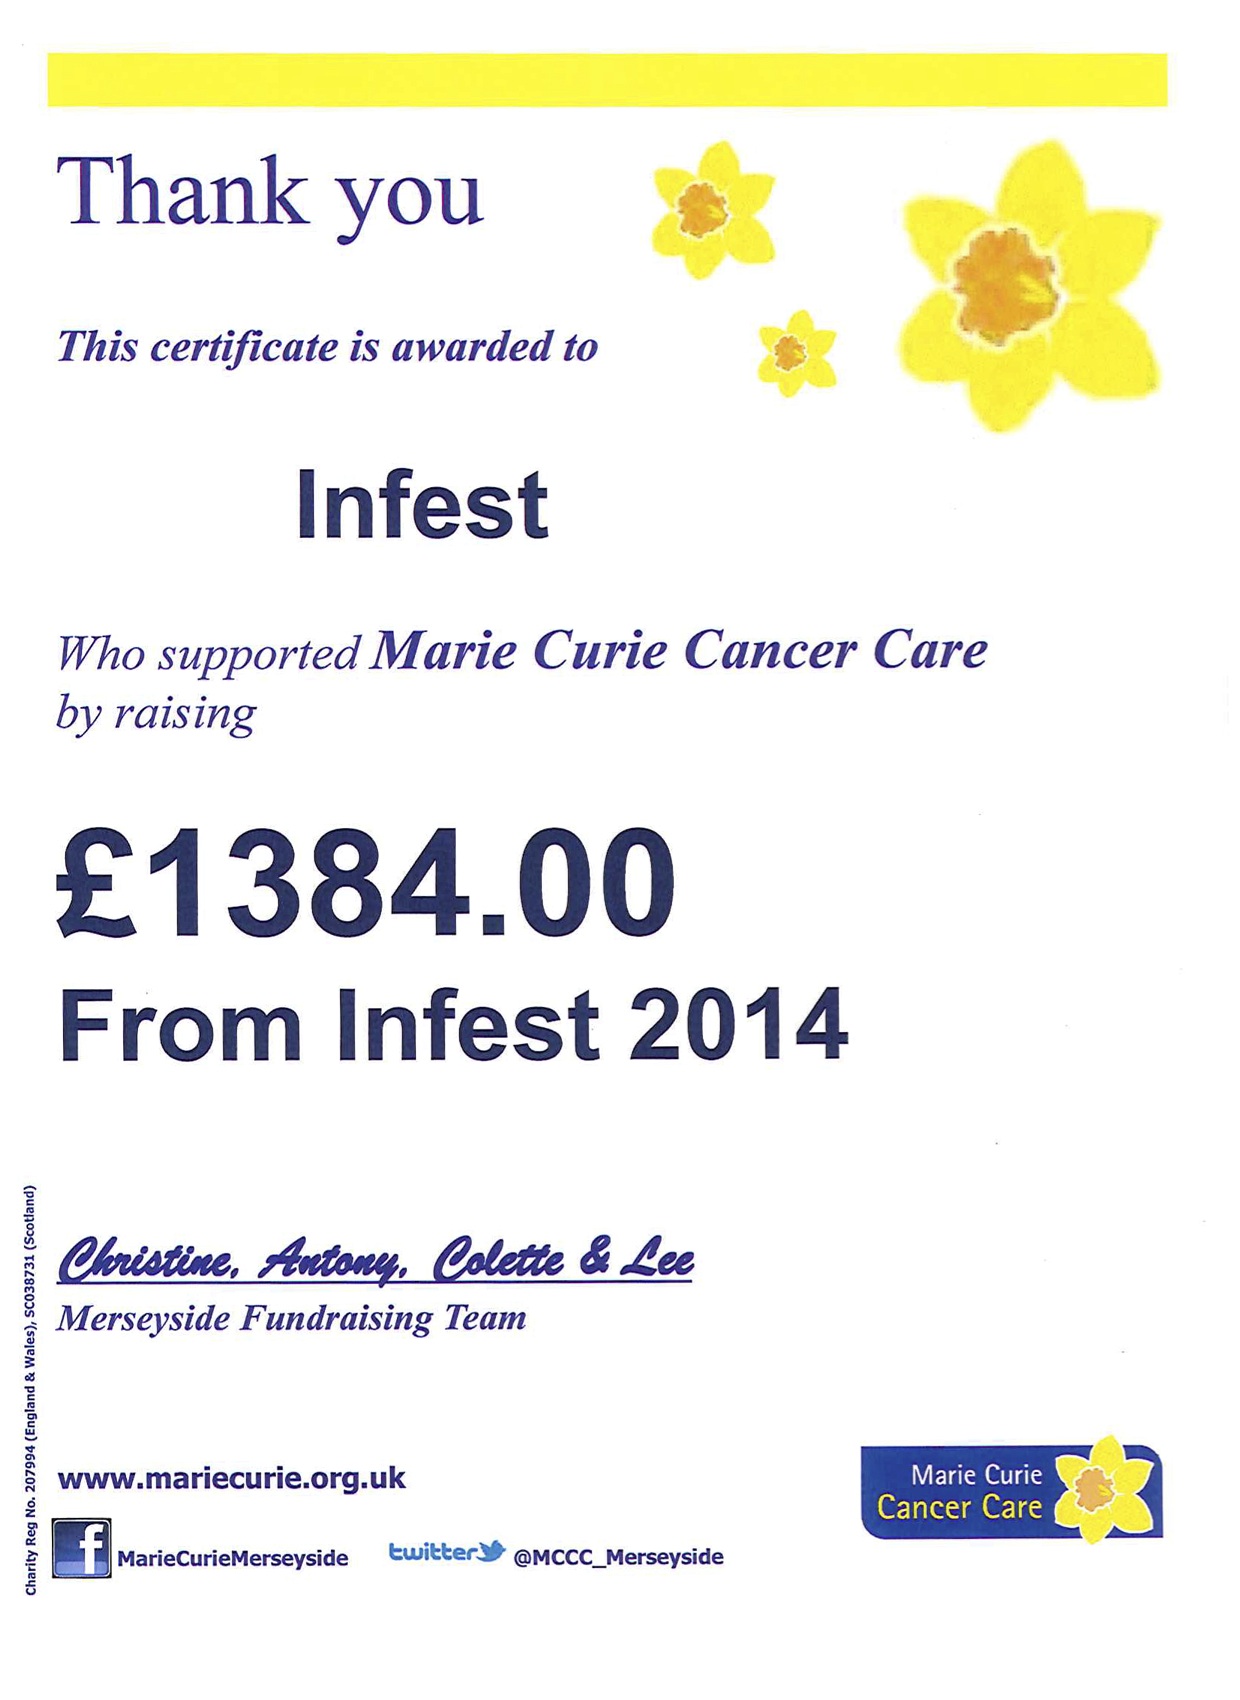 Marie Curie Cancer Care charity donation certificate 2014 